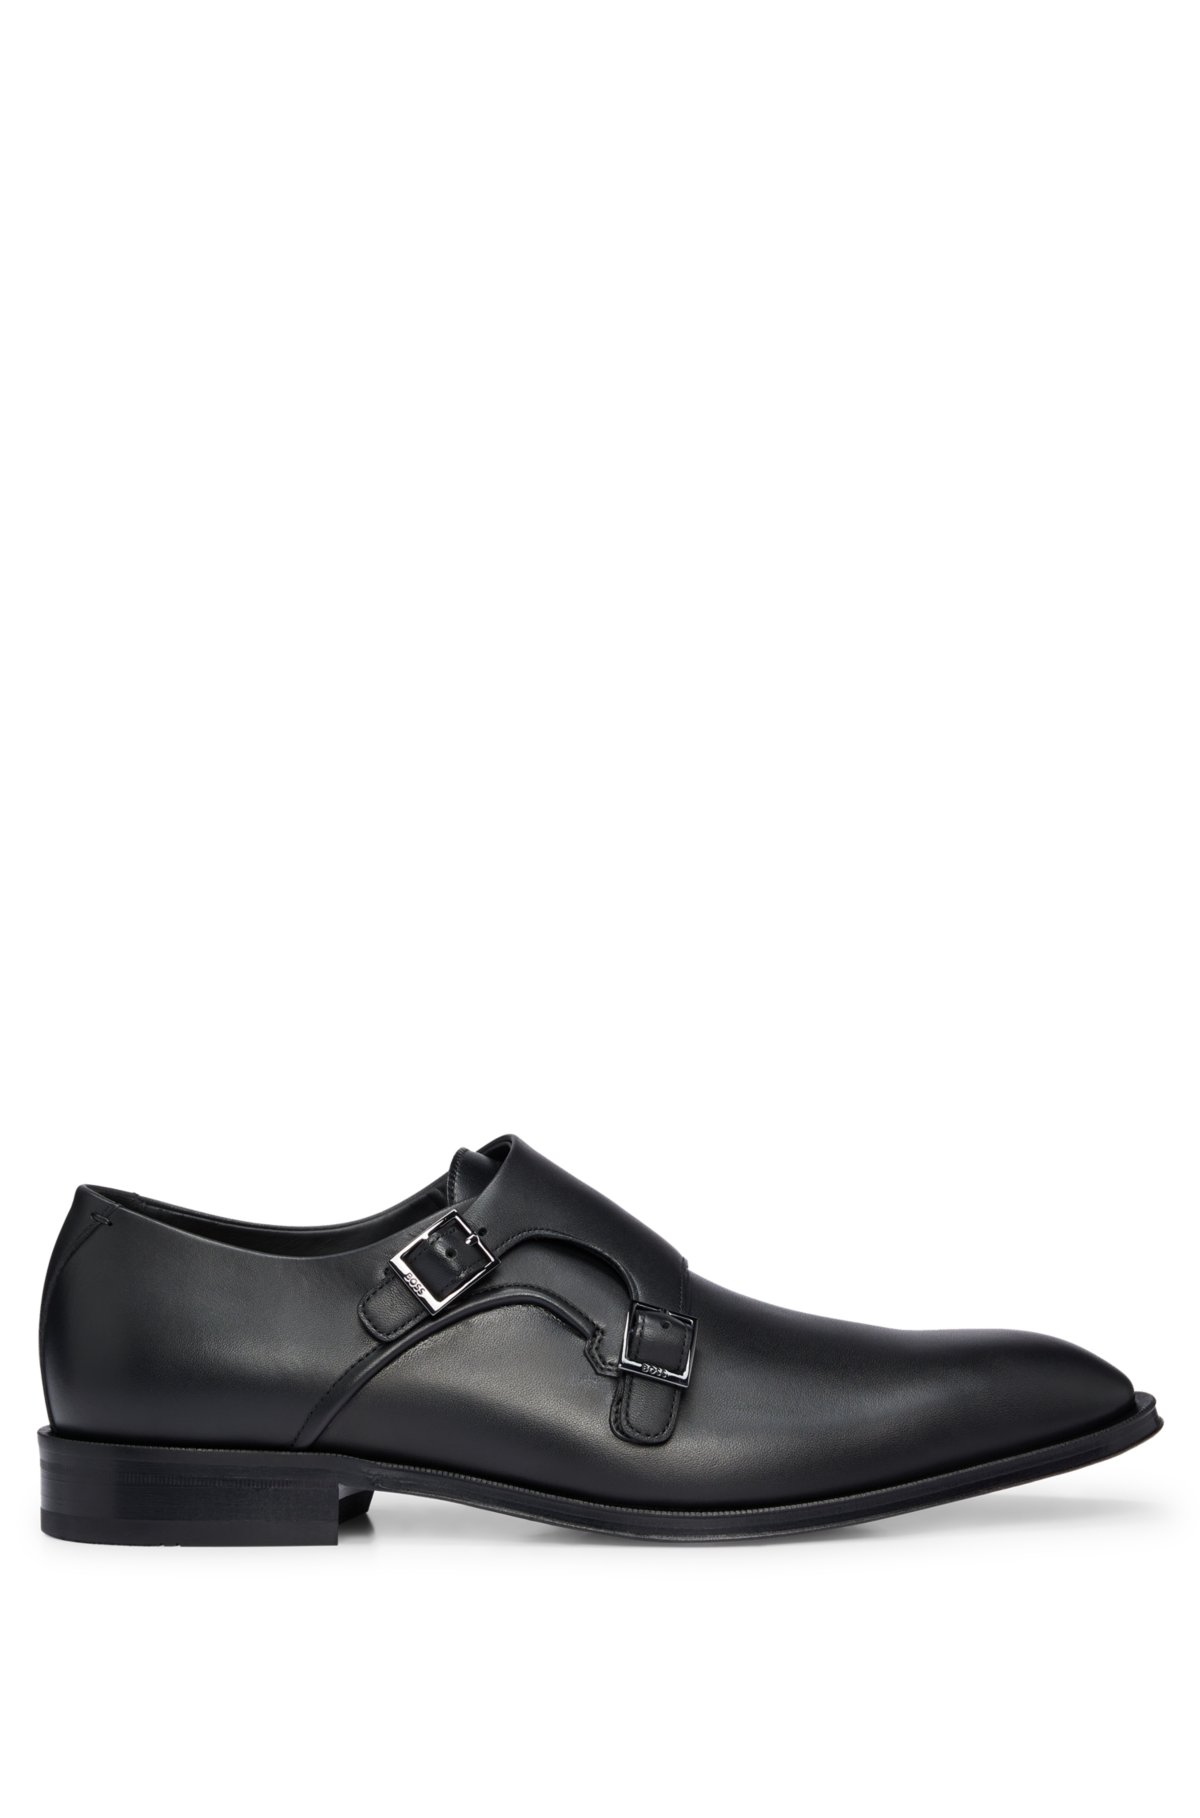 BOSS - Double-monk shoes in smooth leather with metal buckles